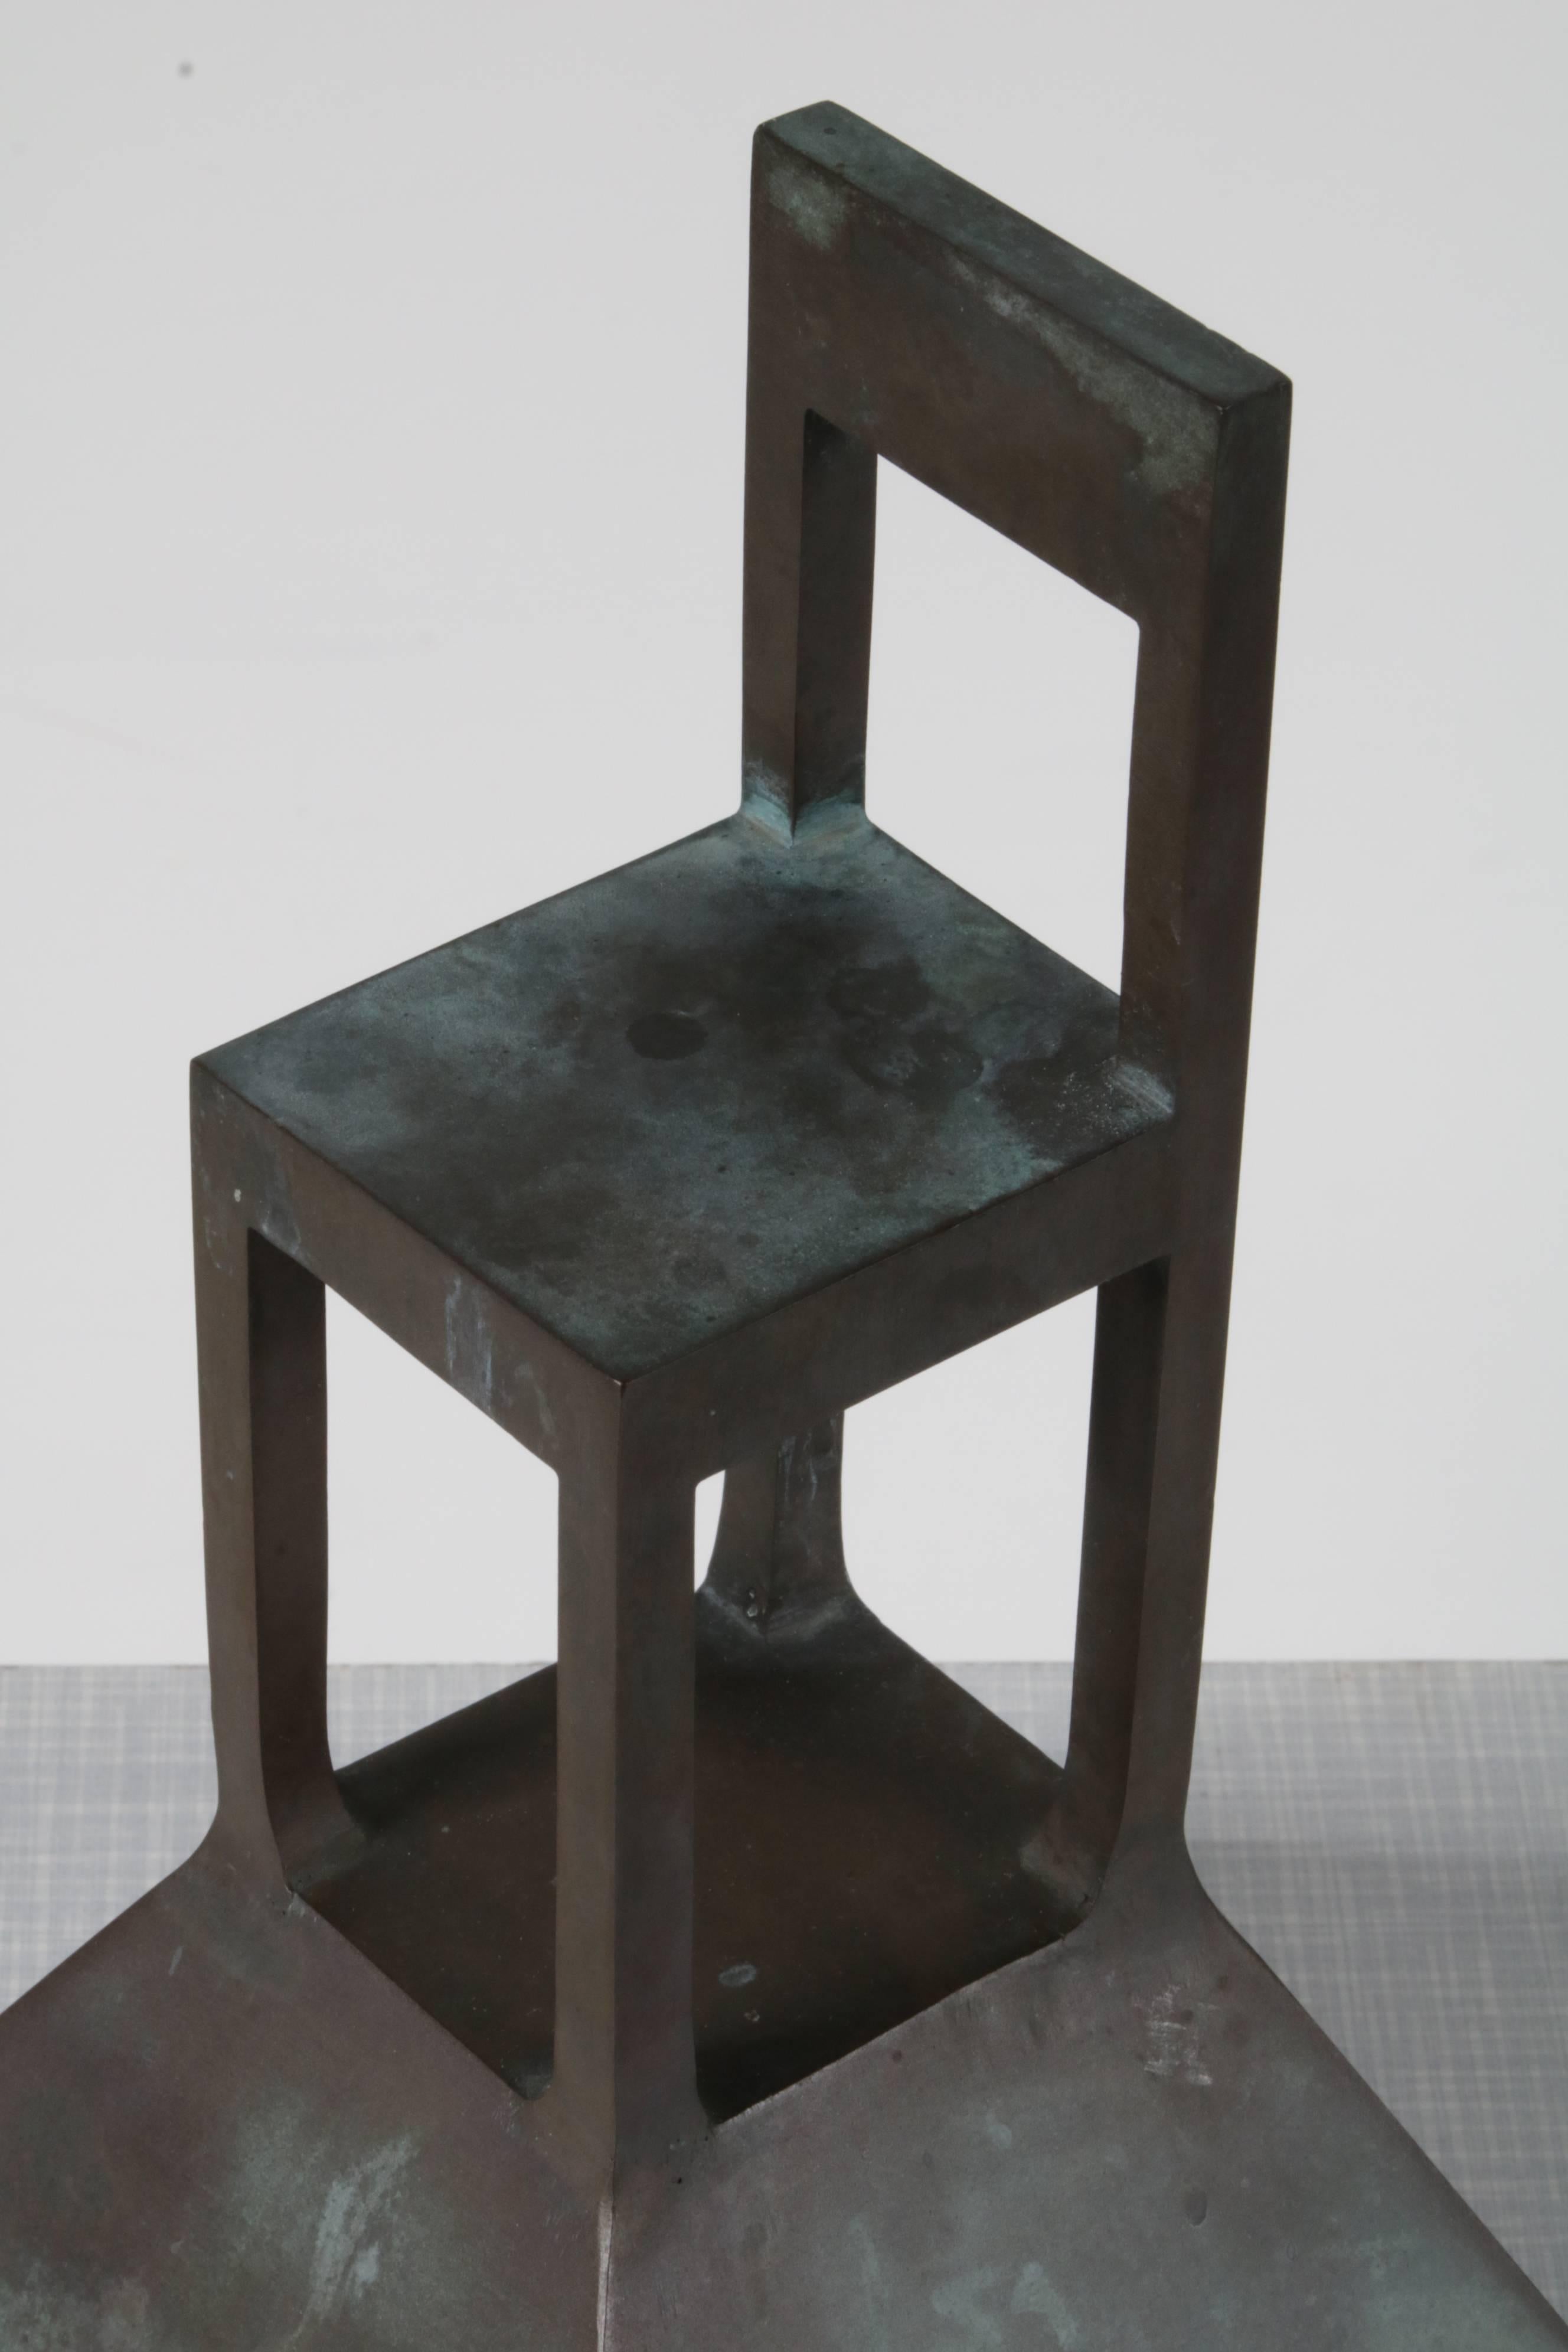 A unique miniature of the Lassu' chair by Alessandro Mendini, manufactured by Vitra in Germany around 1990.

This very rare piece is a limited edition: only 250 were made for Vitra's miniature collection. It is made of high quality bronze, giving